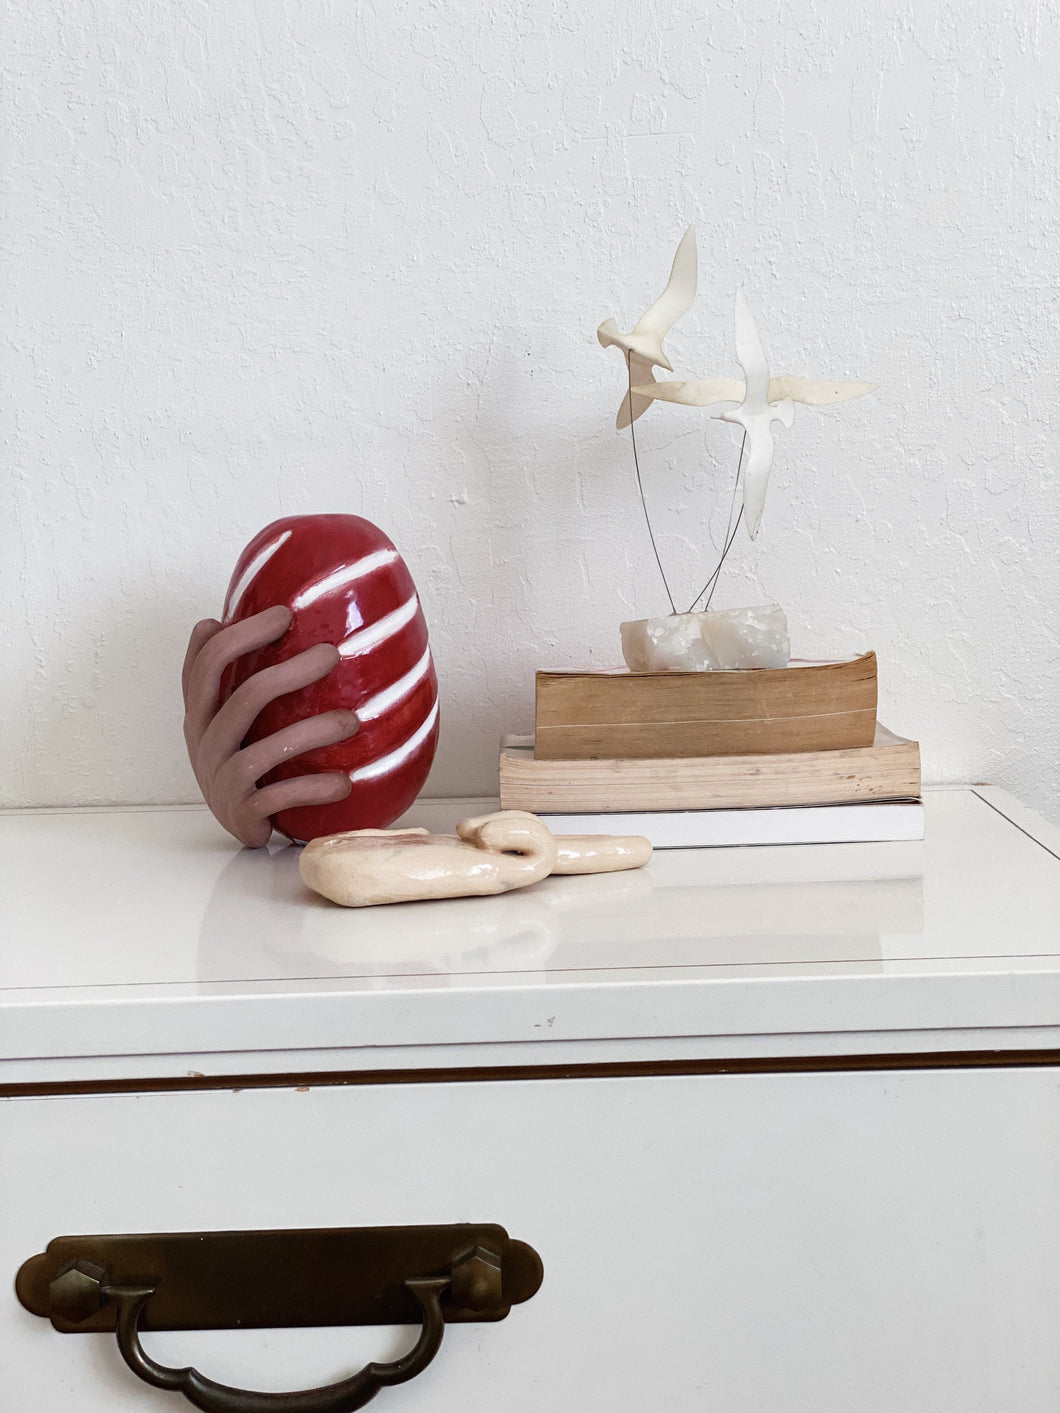 Handmade Hand Red Apple Ceramic Abstract Sculpture 3D - Studio Pottery